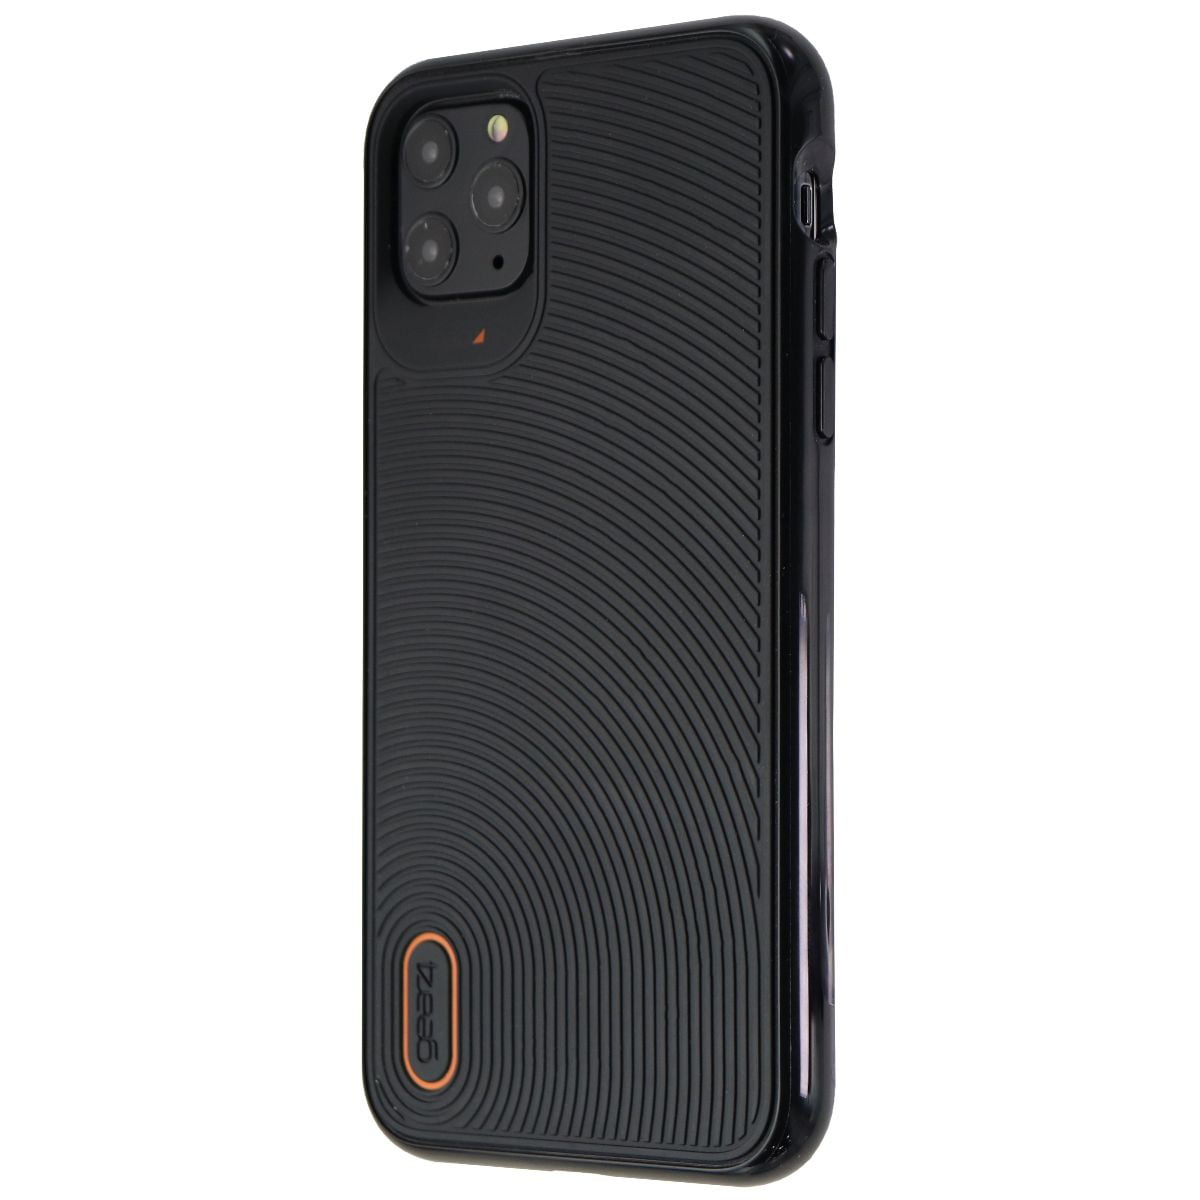 Gear4 Battersea Series Case for Apple iPhone 11 Pro Max (6.5-inch